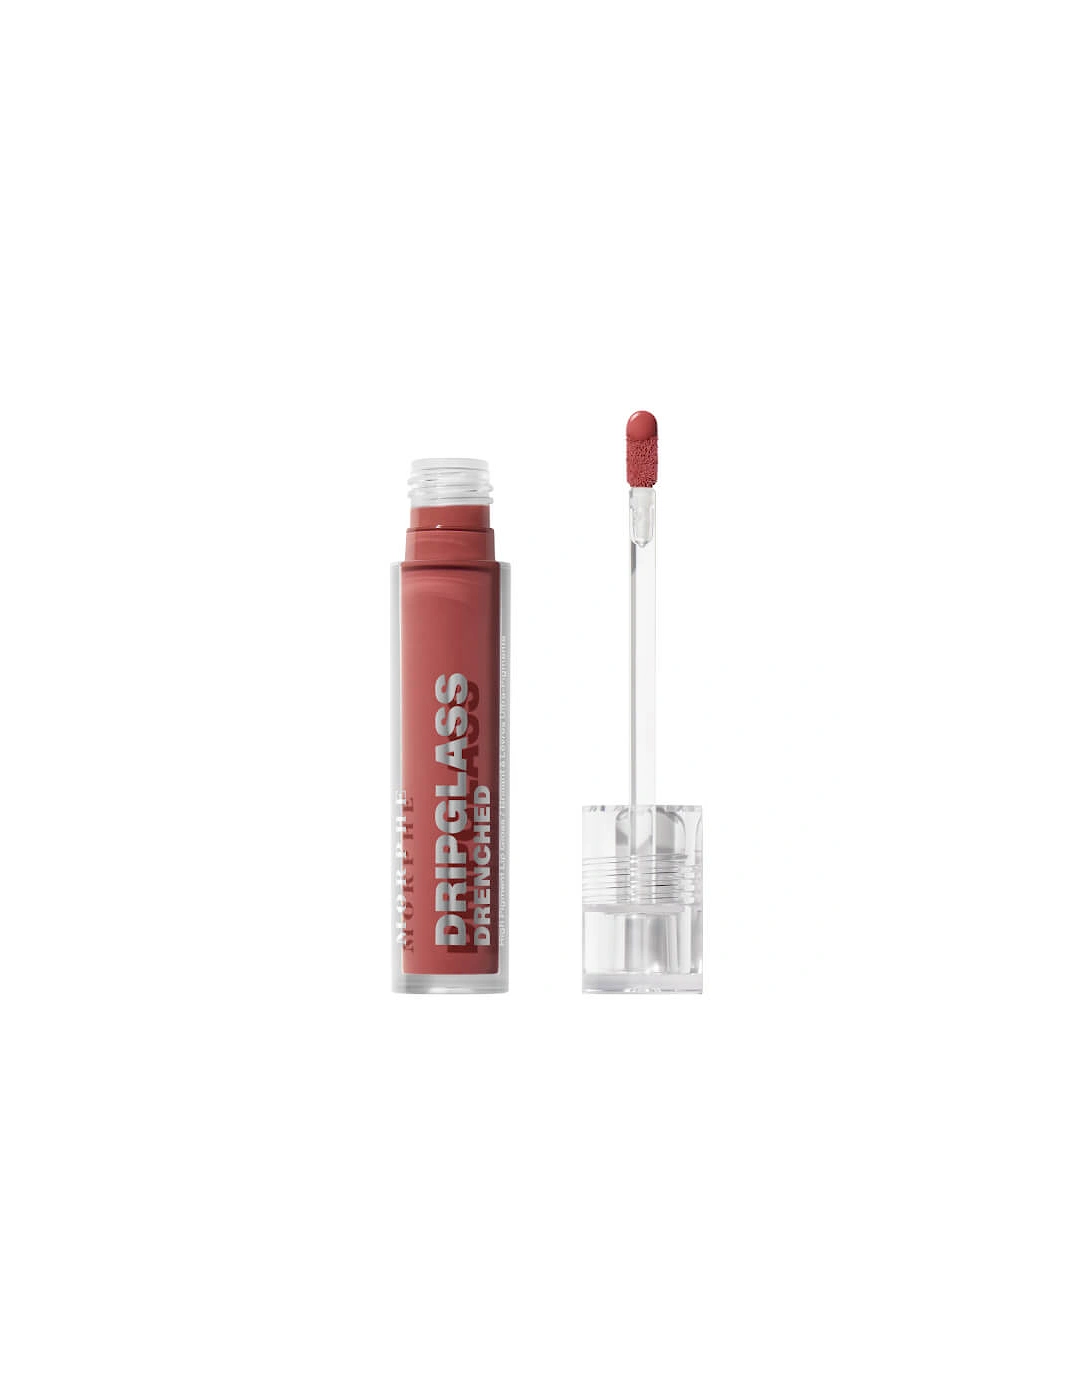 Dripglass Drenched High Pigment Lip Gloss - Deep Brick, 2 of 1